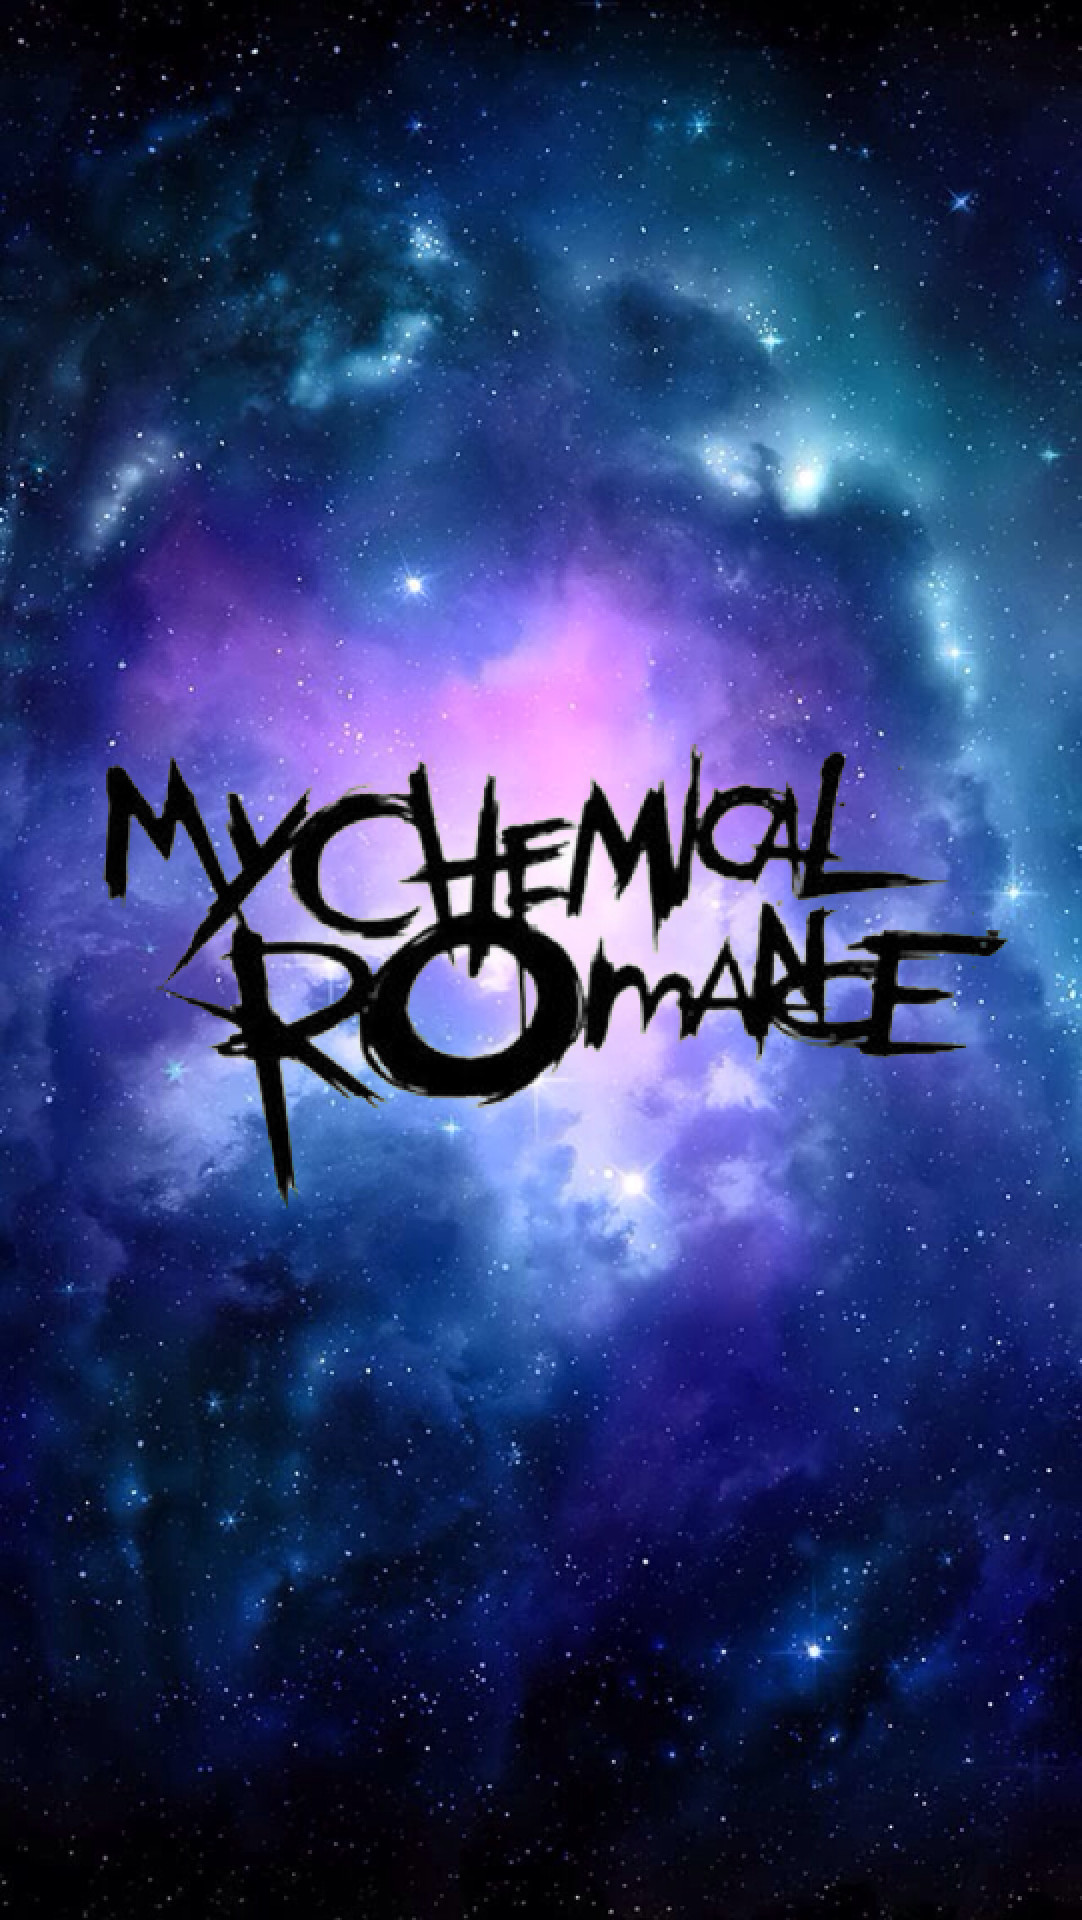 1082x1920 My Chemical Romance wallpaper for iPhone 5 that I made. Comment if you want  more